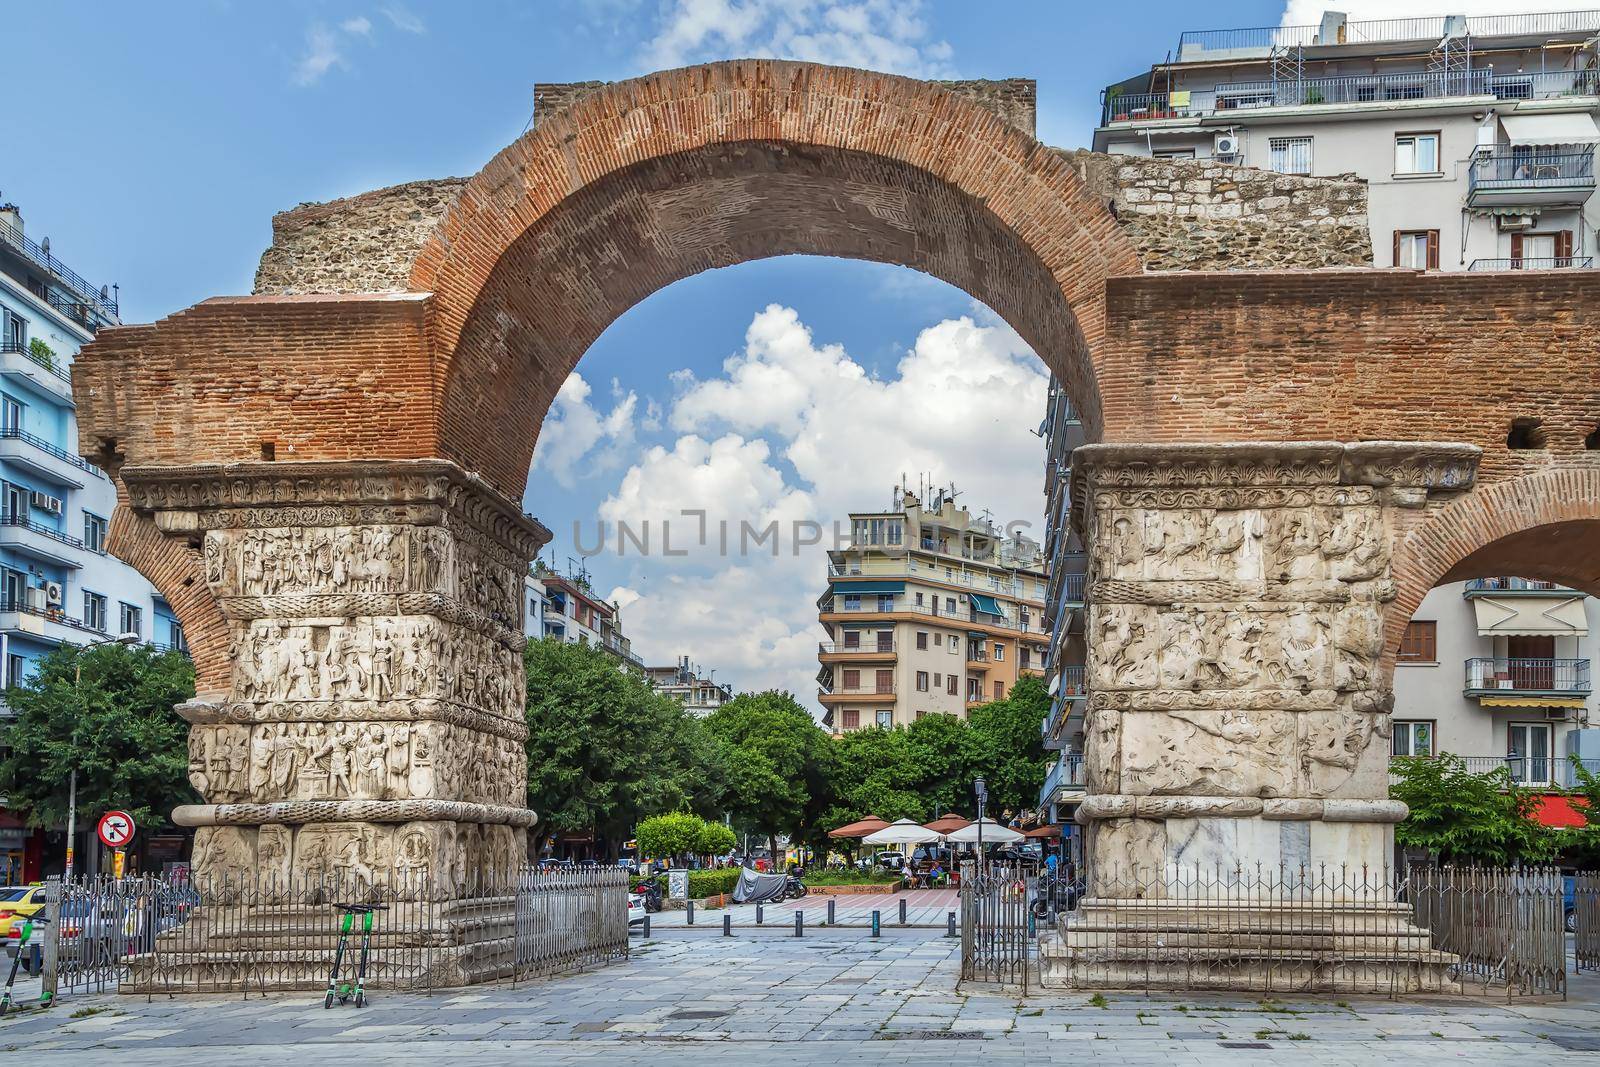 The Arch of Galerius was built in 298 to 299 AD, Thessaloniki, Greece